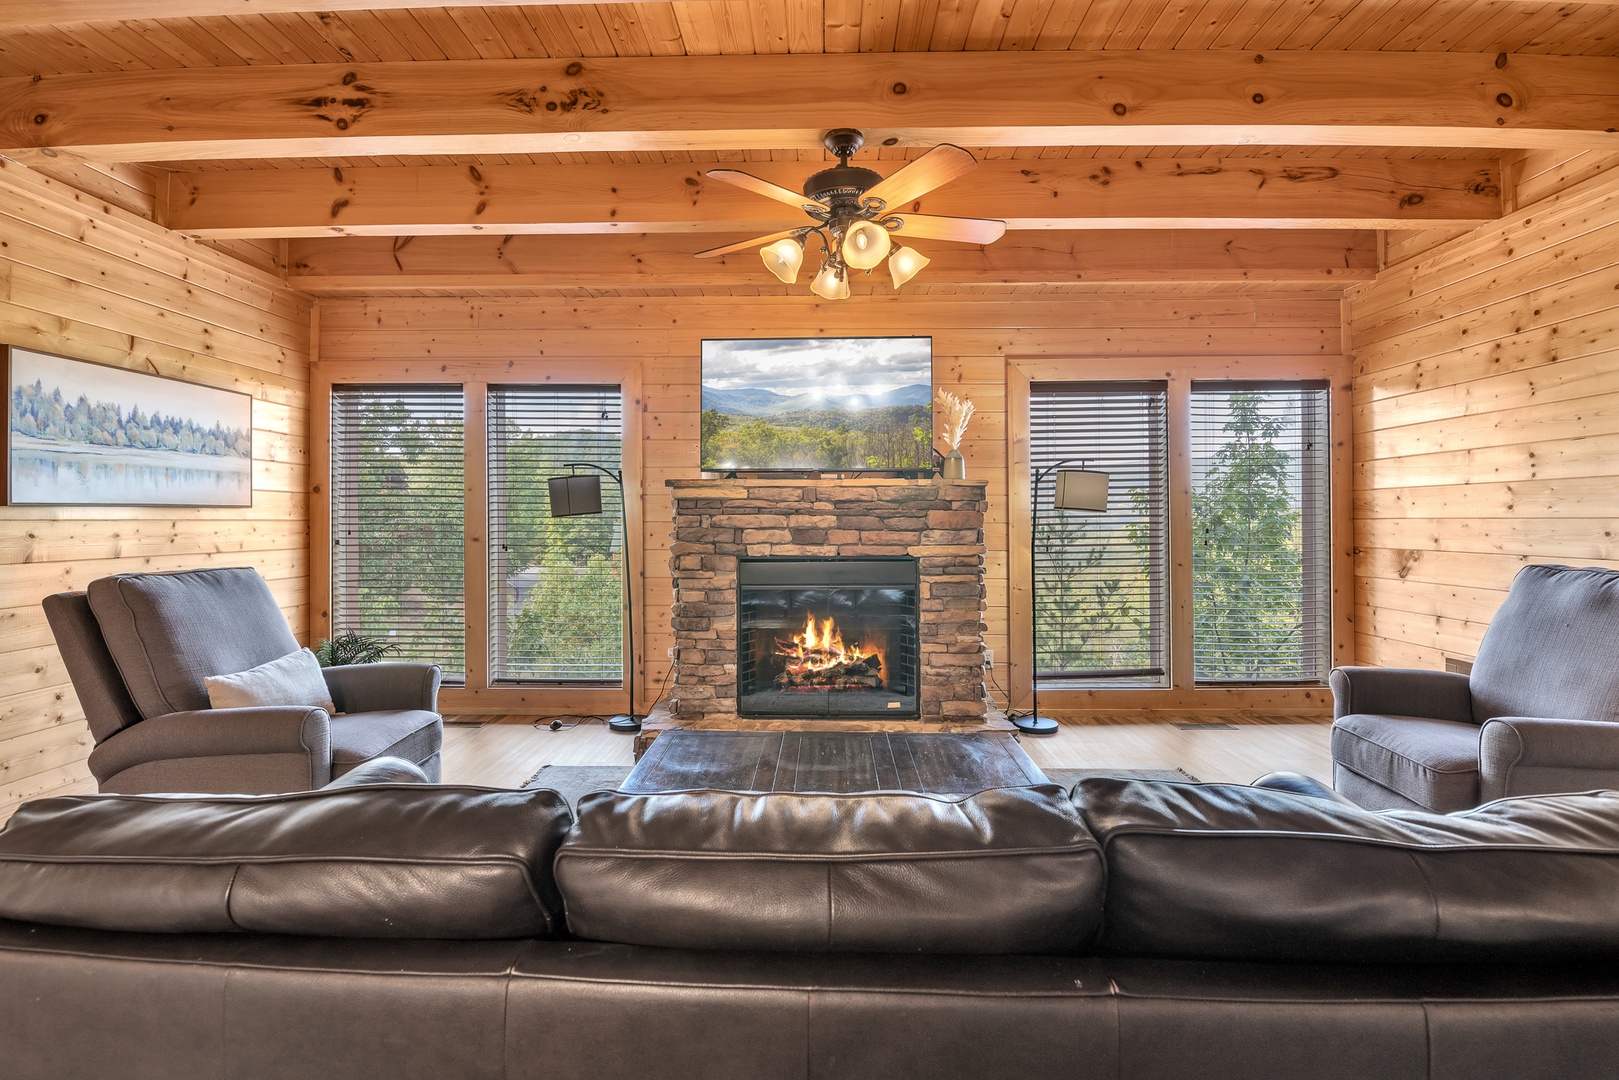 Curl up in the spacious living room & enjoy a movie by the fireplace